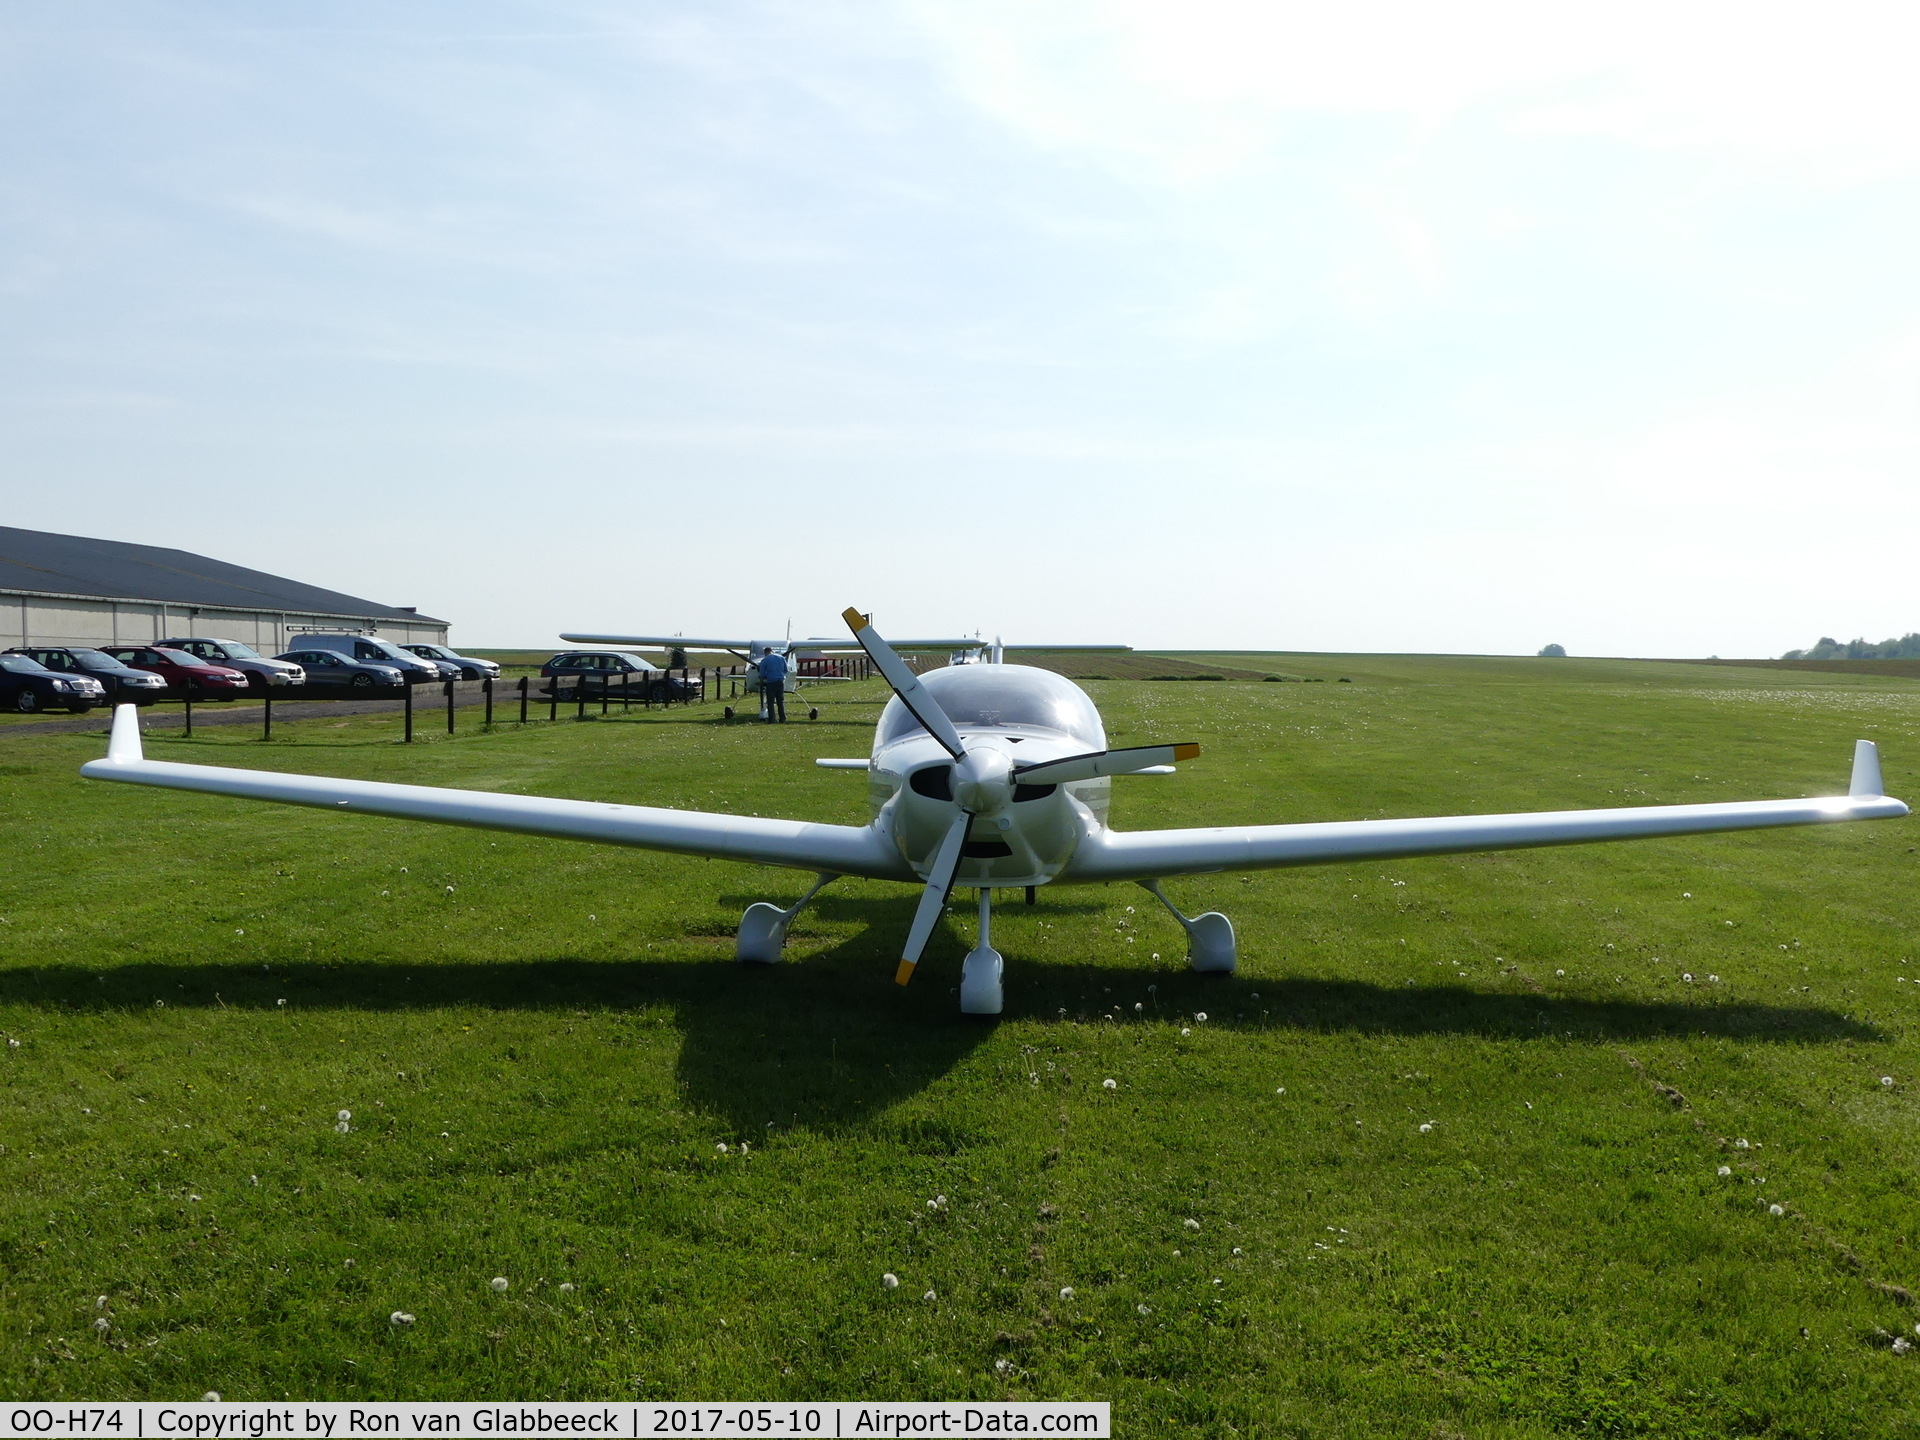 OO-H74, 2009 Aerospool WT-9 Dynamic LSA C/N DY339/2009, From the front